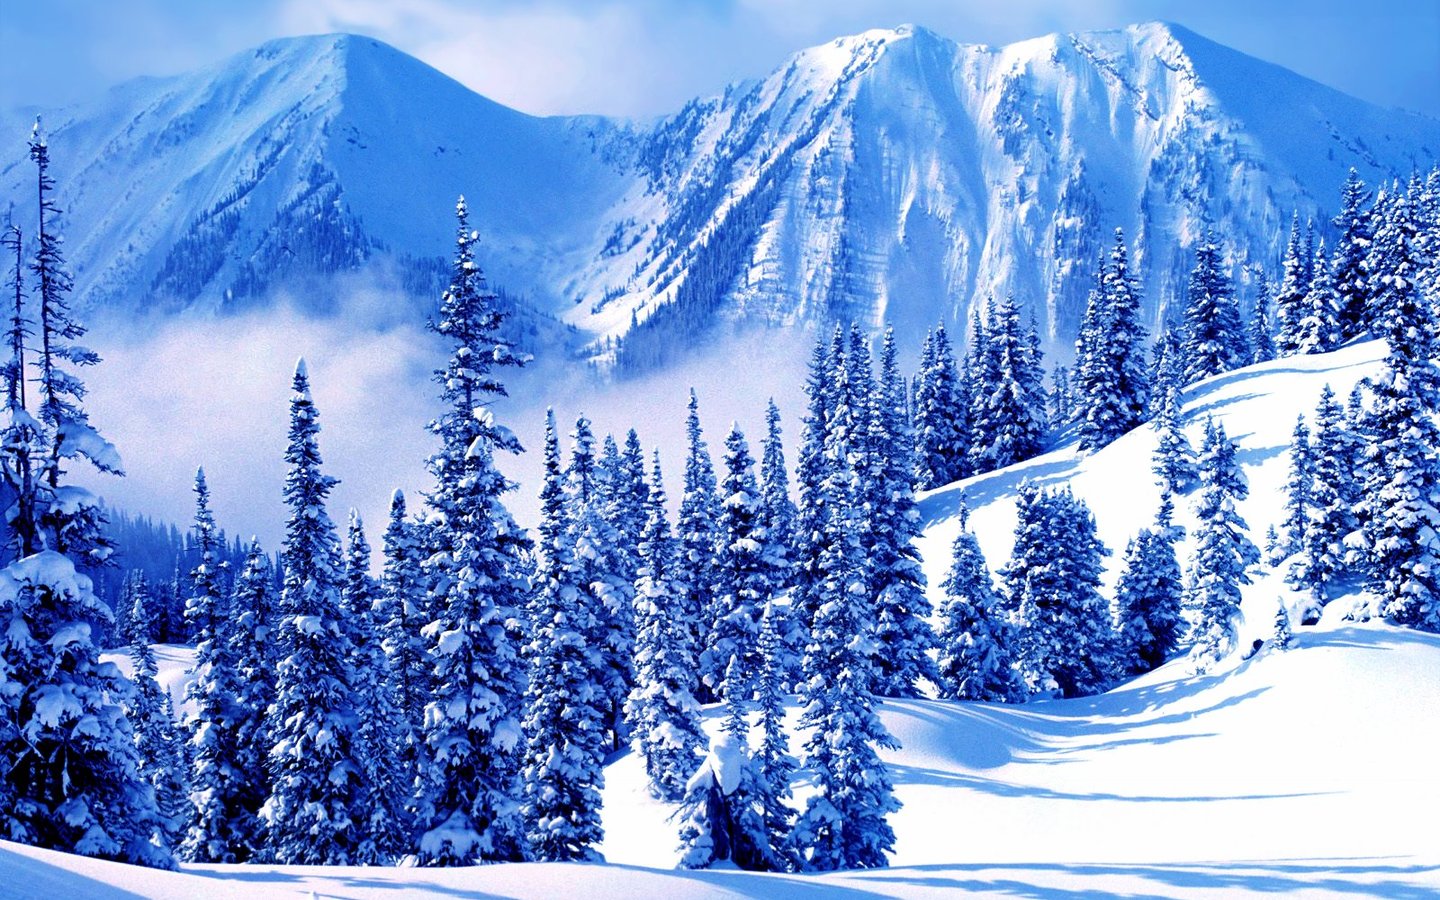  wallpapers wallpapersdepo net wallpapers 1202 winter mountains 1440x900